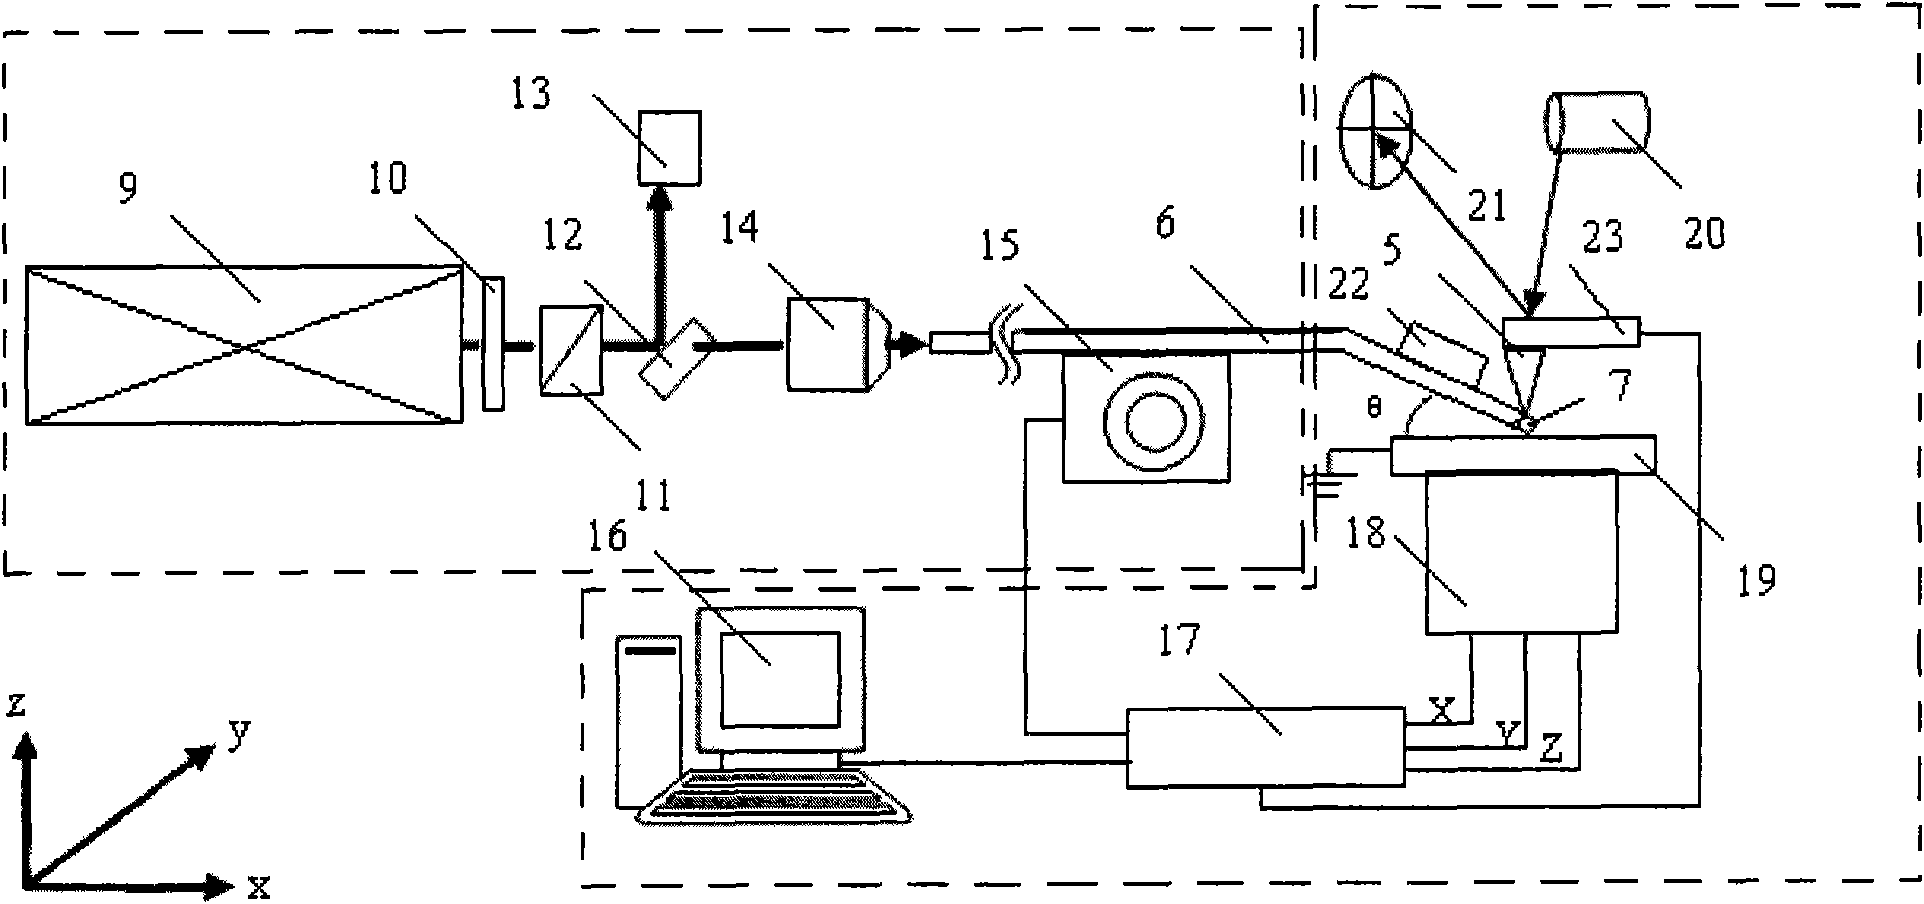 Nanomanipulation method for compounding laser near-field optical tweezers and AFM probe